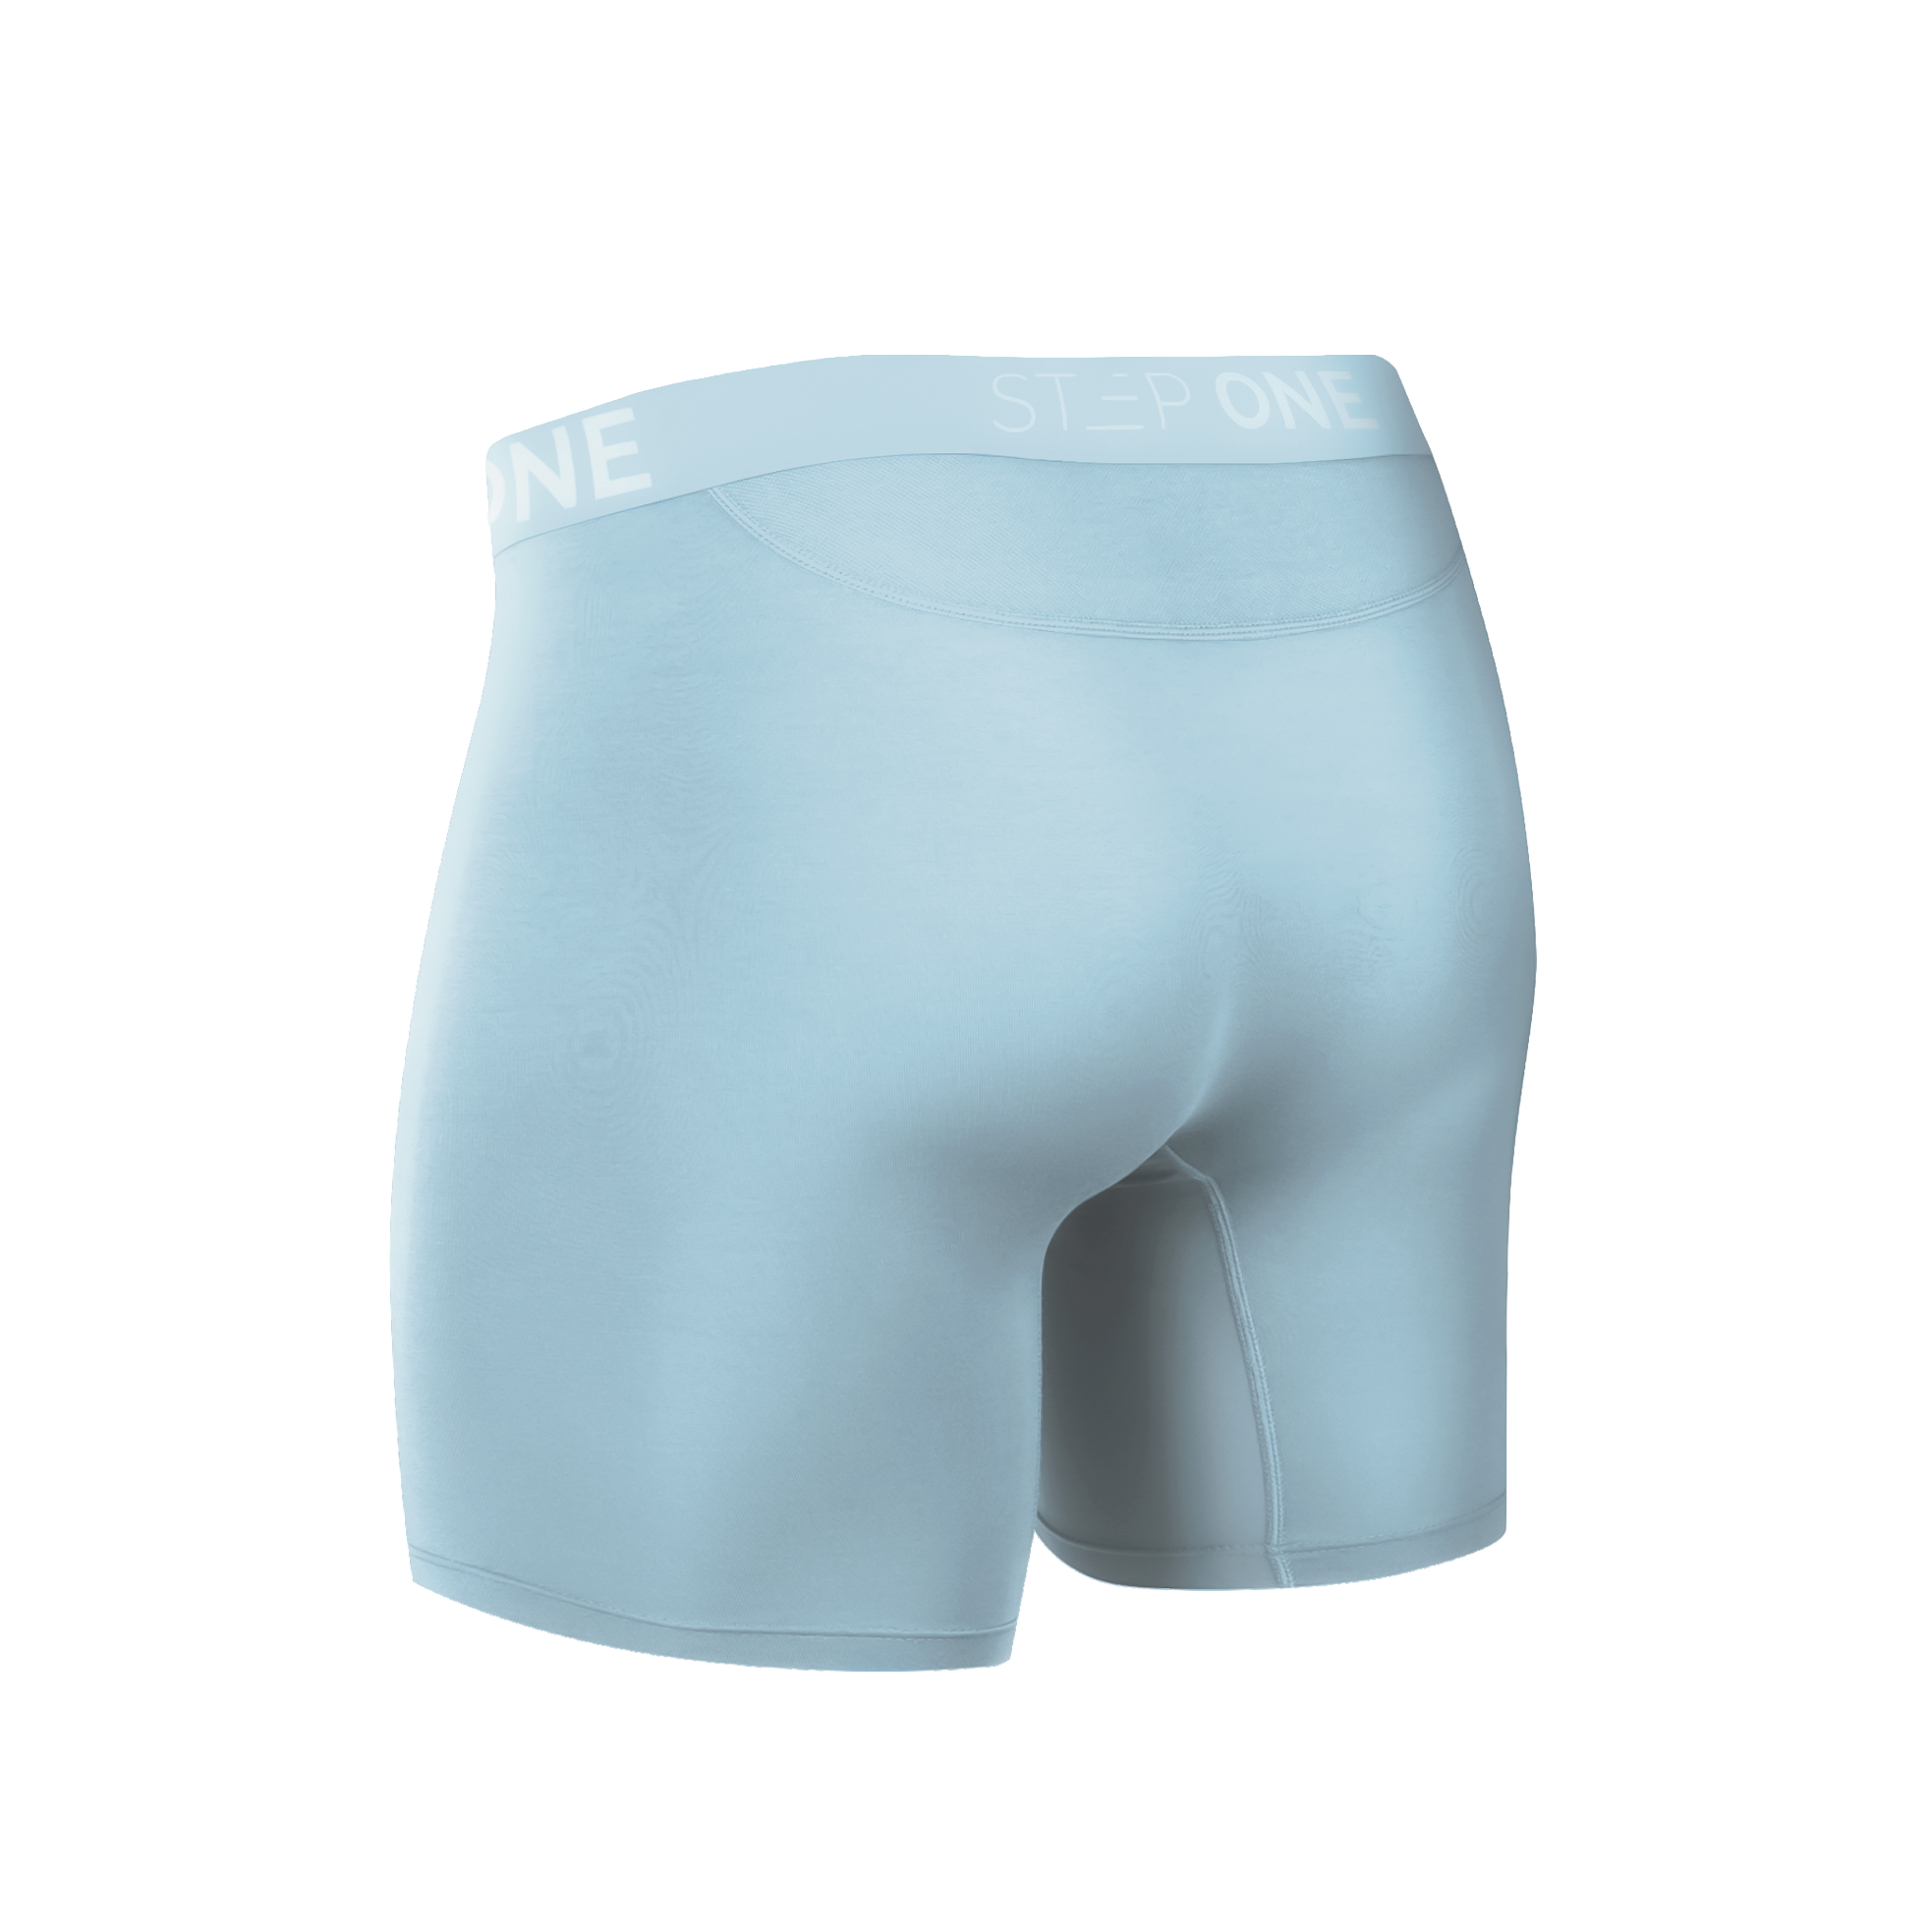 Boxer Brief - Ice Cubes - View 4